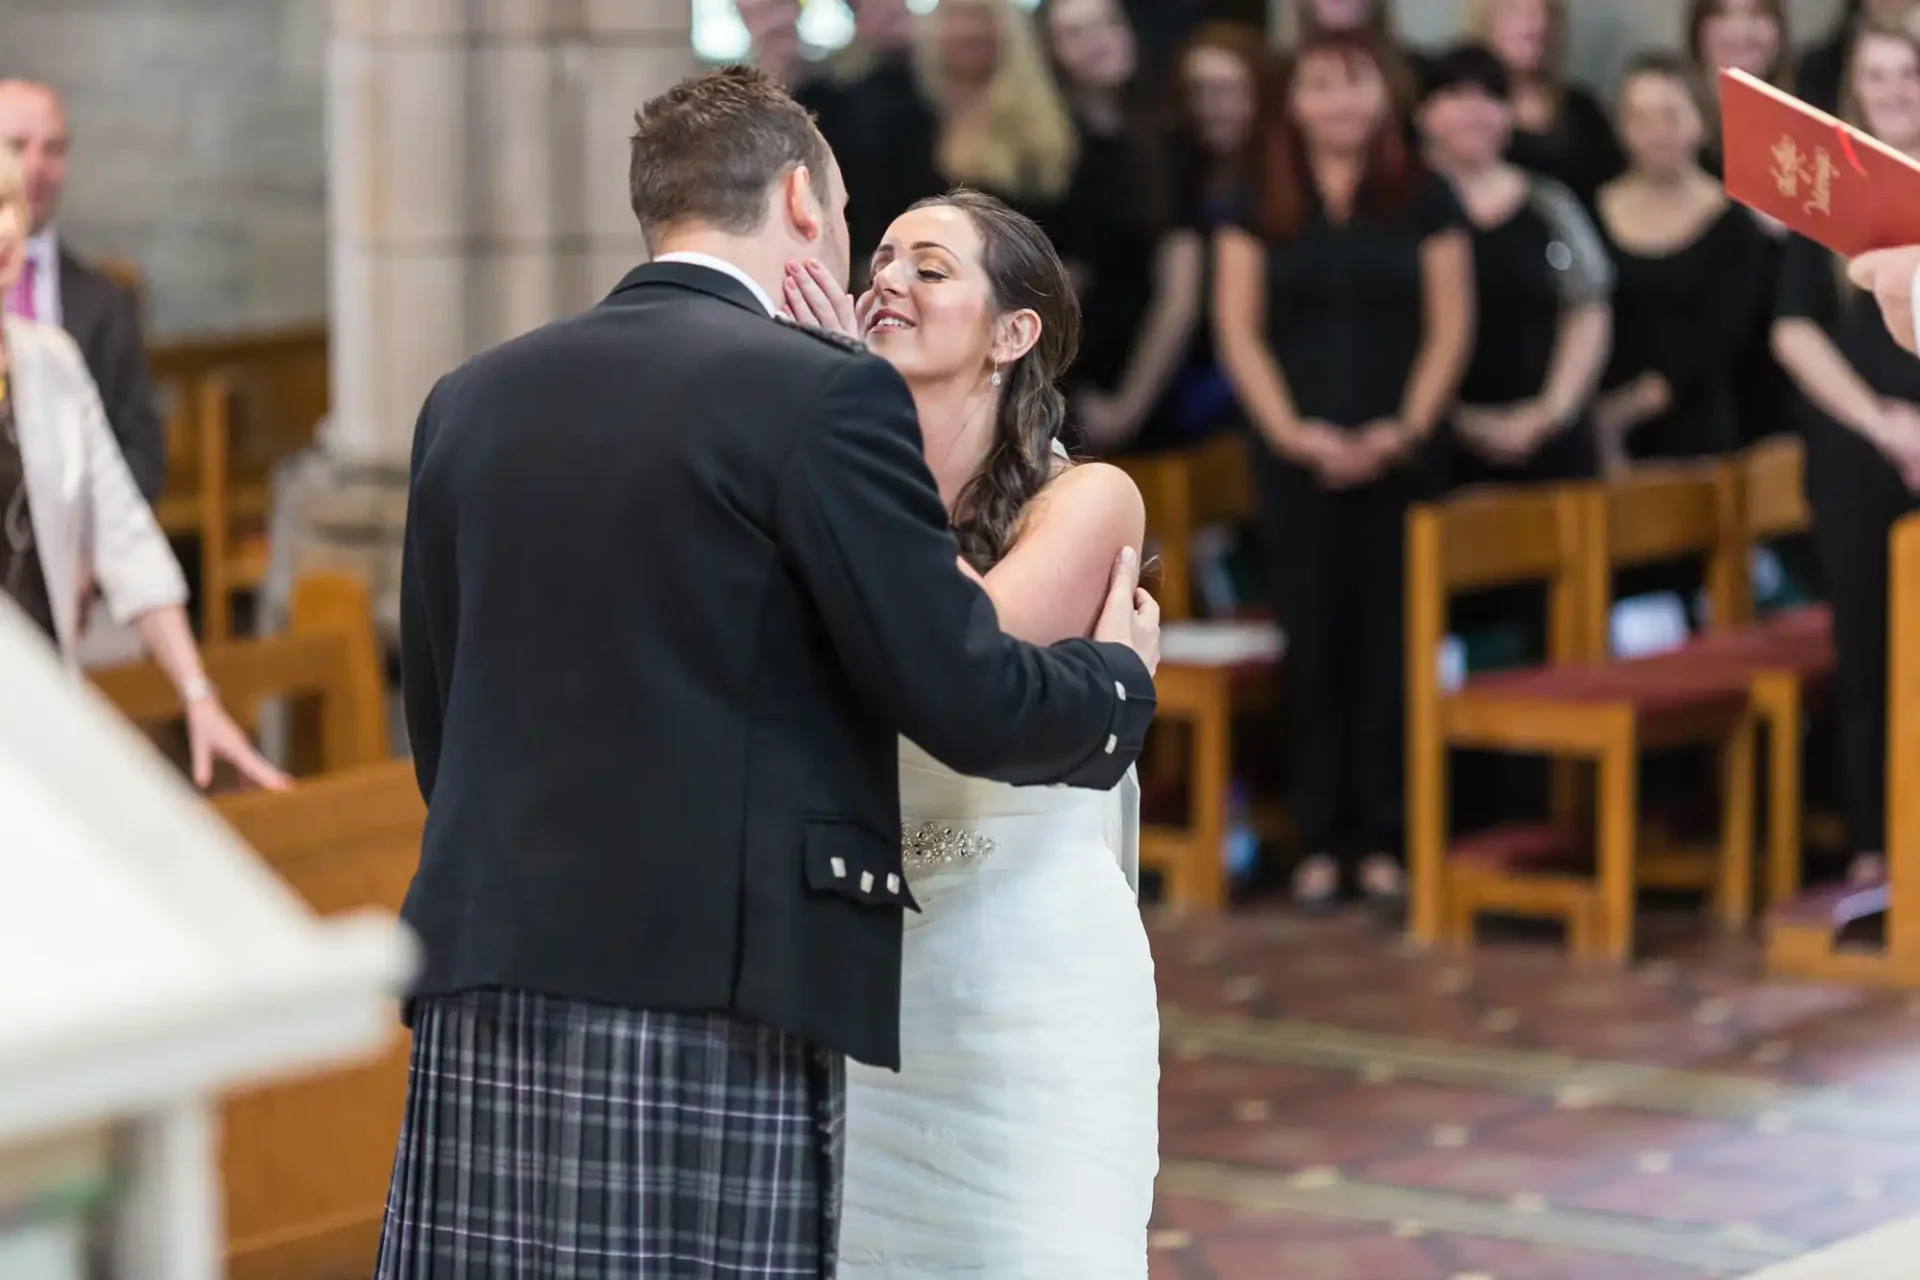 A bride and groom, the groom in a kilt, embrace during their wedding ceremony inside a church, with guests looking on.